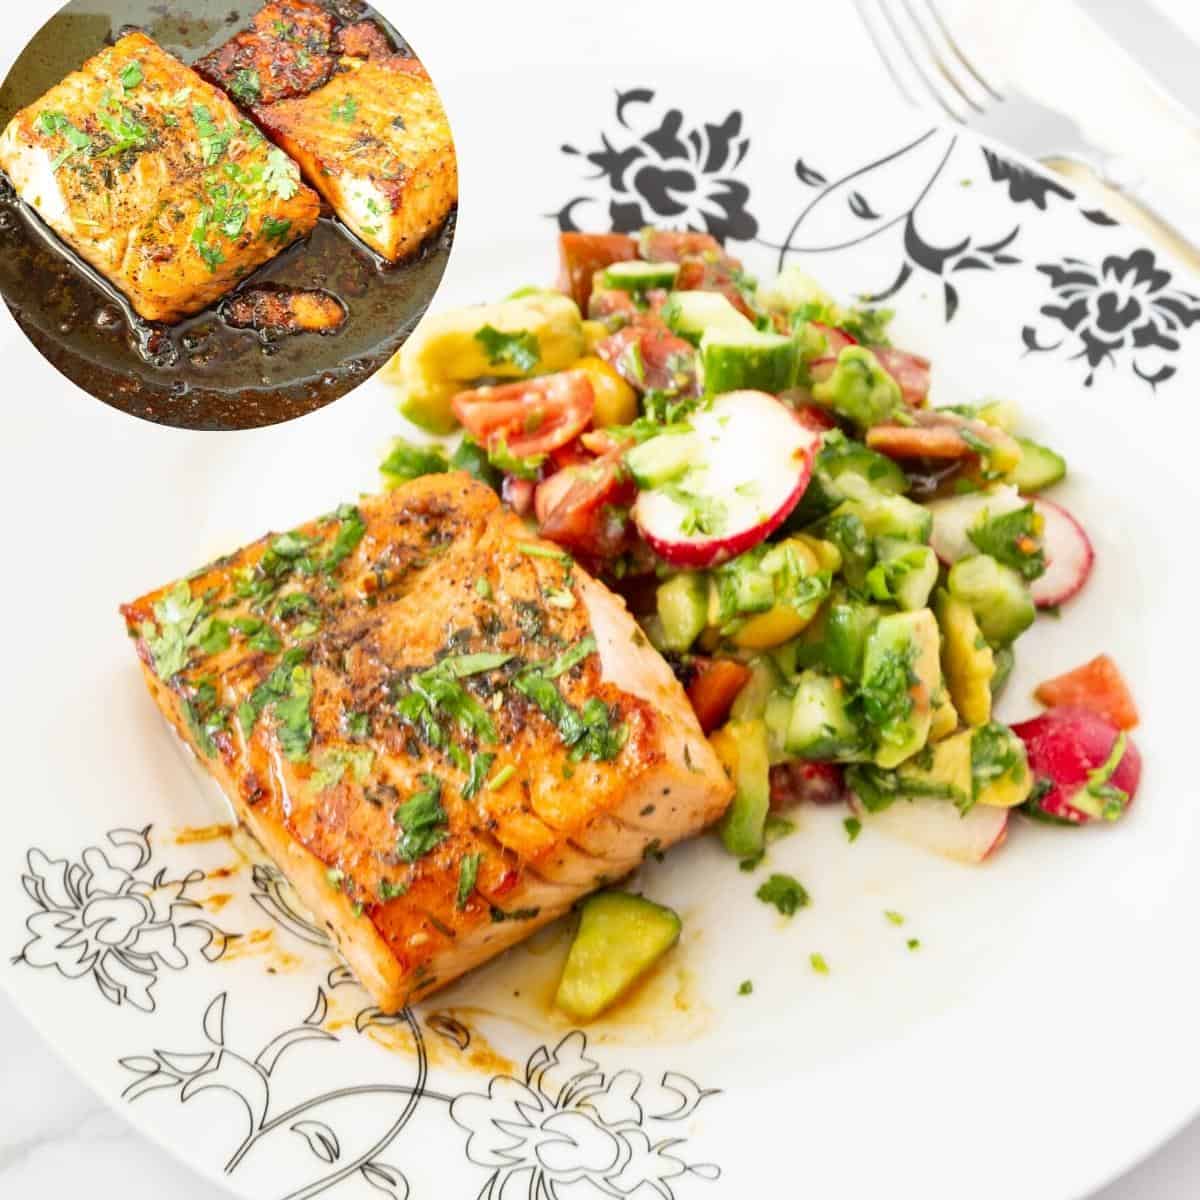 Plate with salad and pan fried salmon in honey garlic.